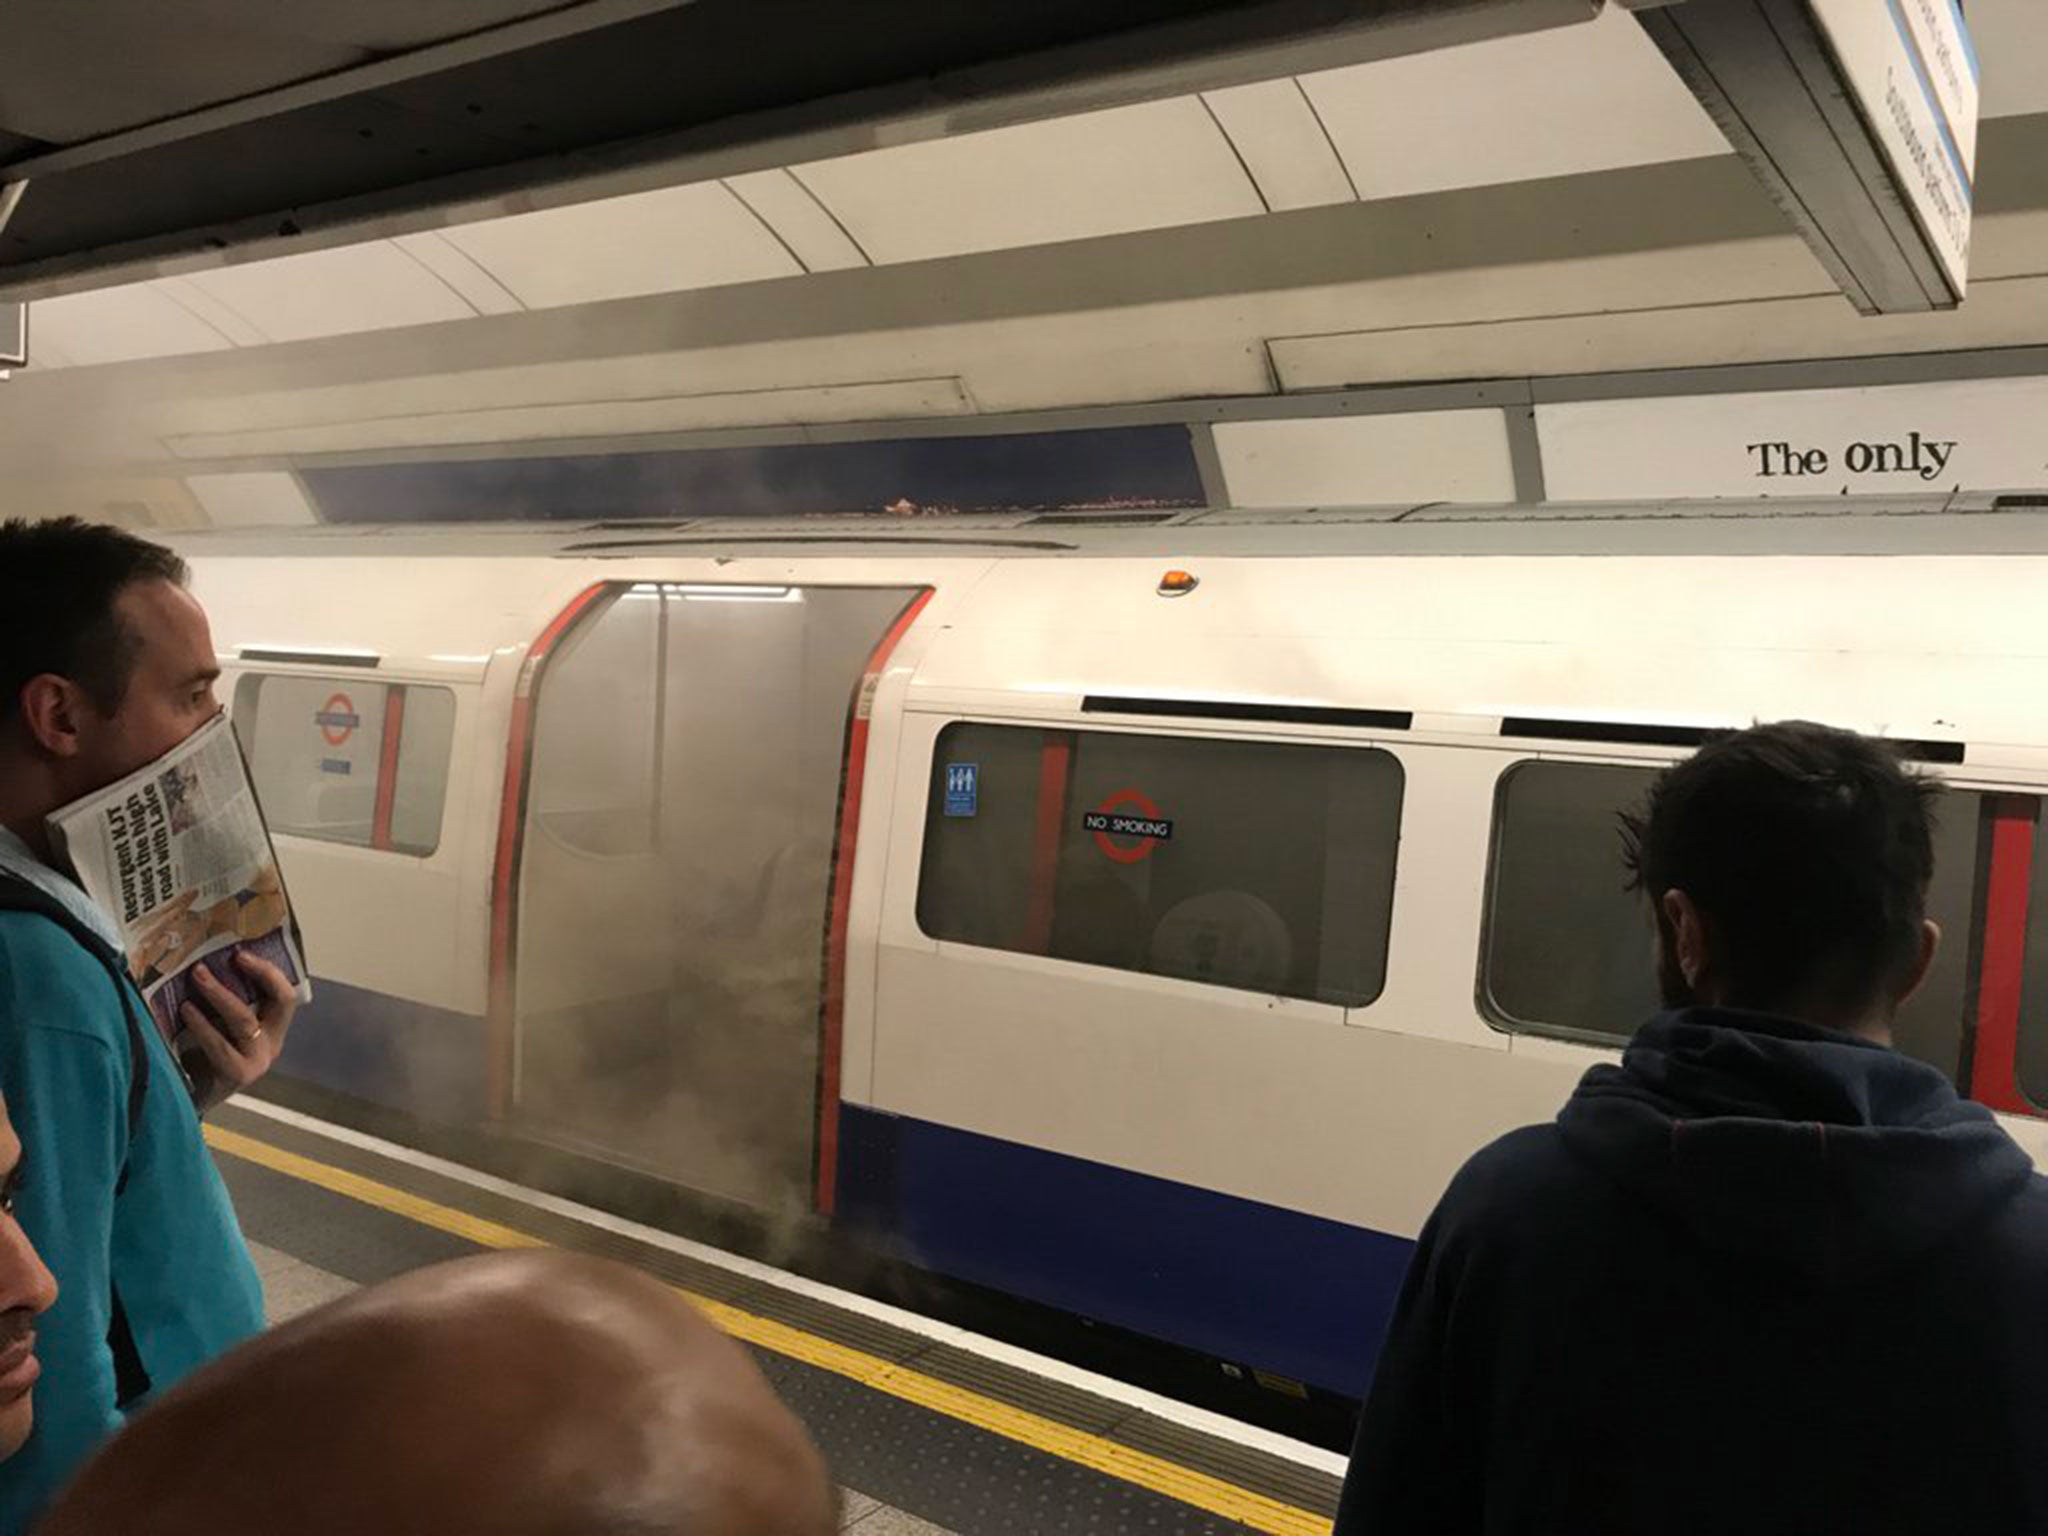 Smoke coming out of a Bakerloo Line train at Oxford Circus station on 11 August